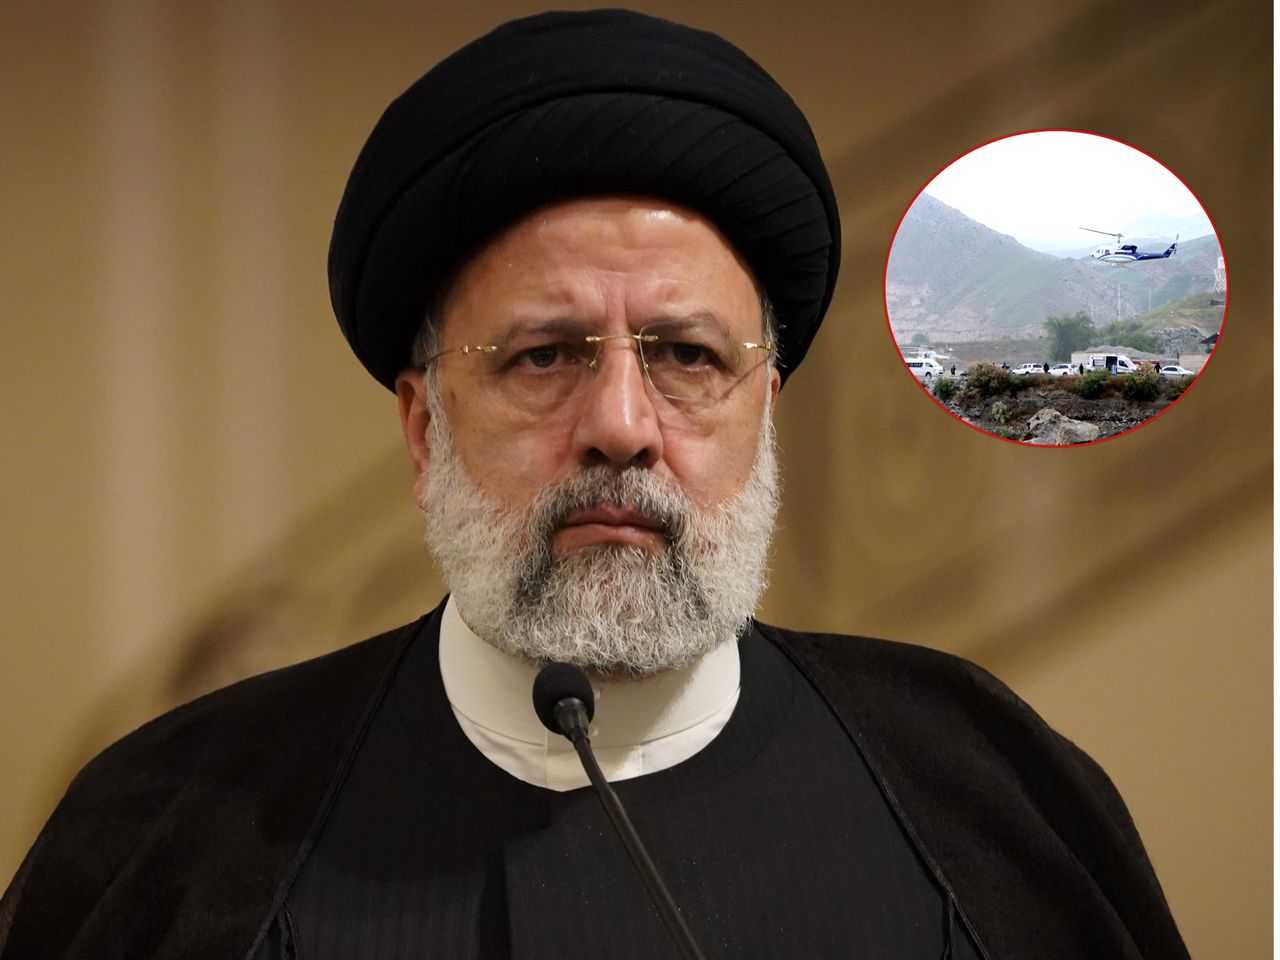 Looking for the sabotage traces: Iranian President Ebrahim Raisi's fatal helicopter crash investigation